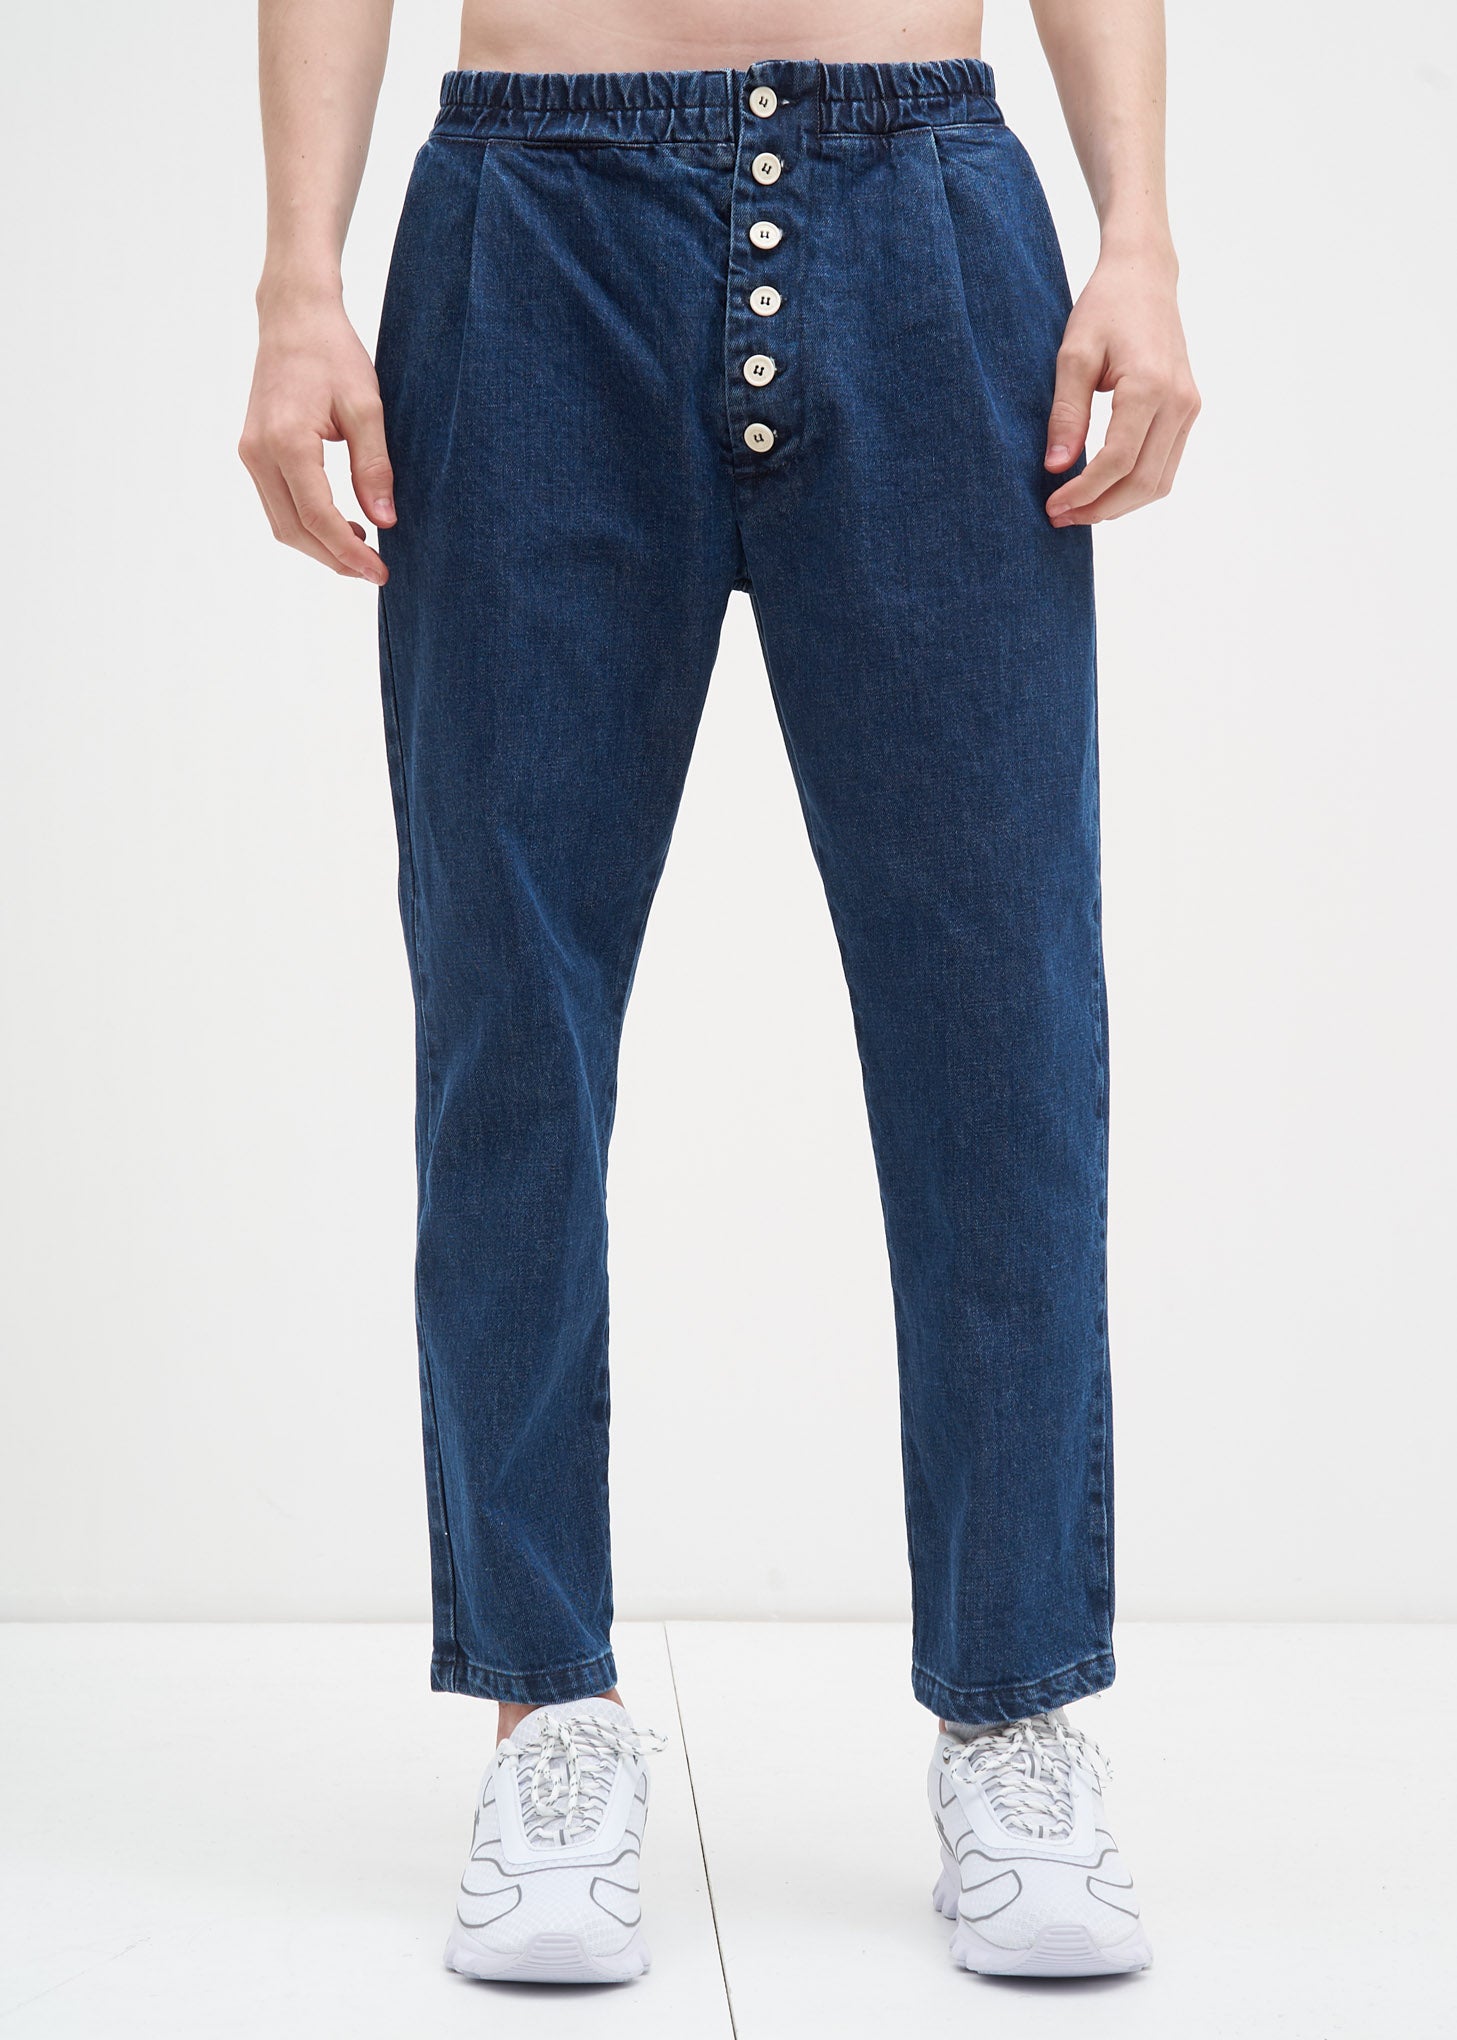 Washed Denim Elastic Pants w/ Buttons